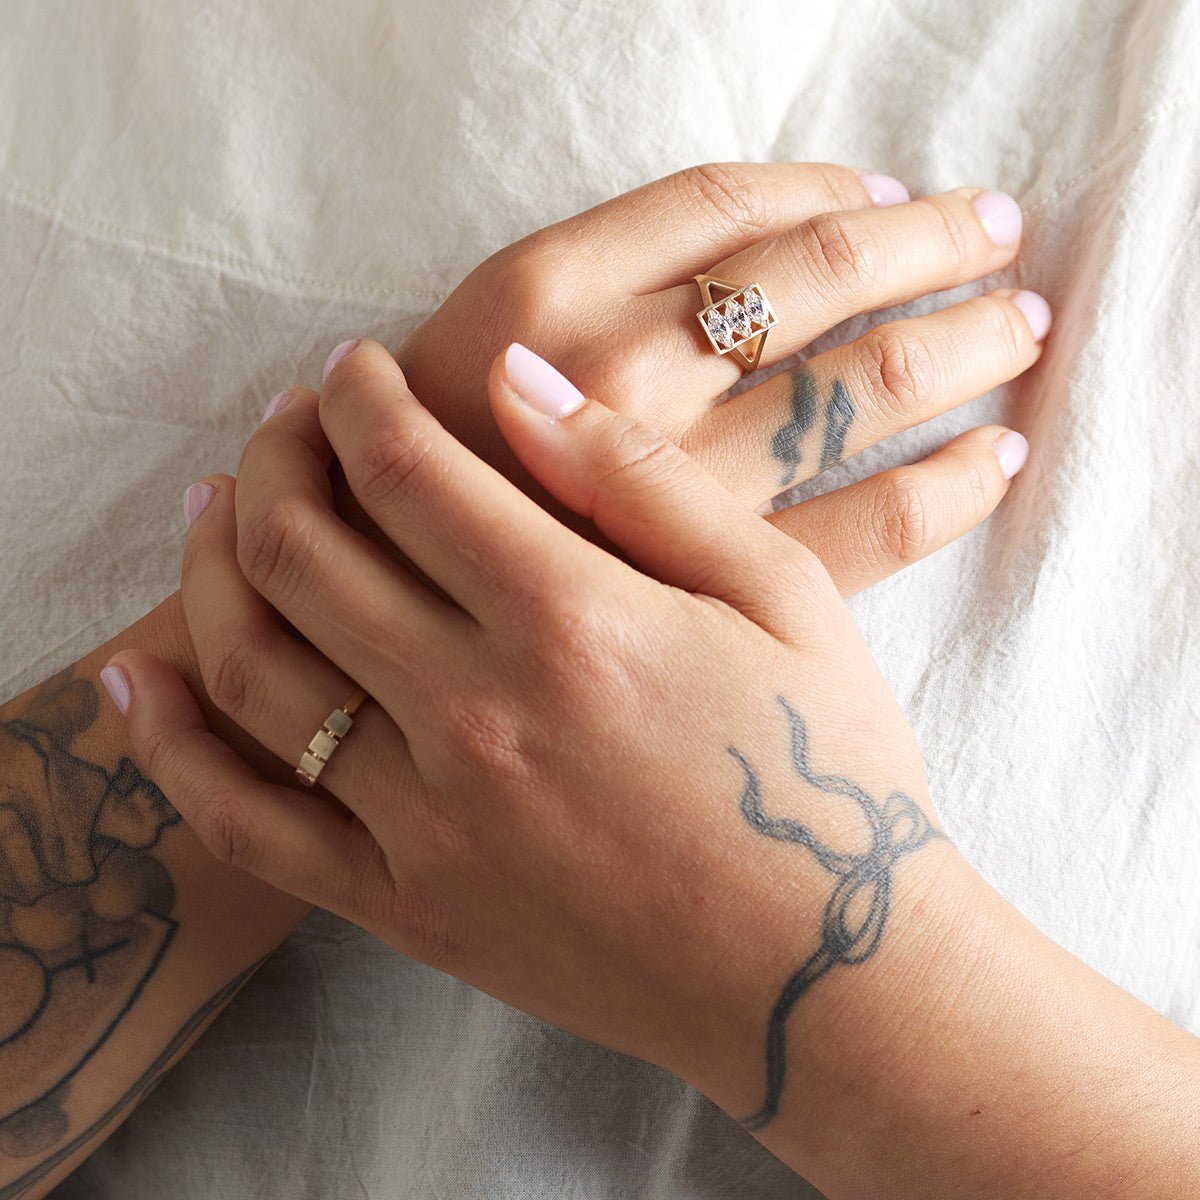 Model wears the Claro ring on their right hand and the Figura ring on their left hand.